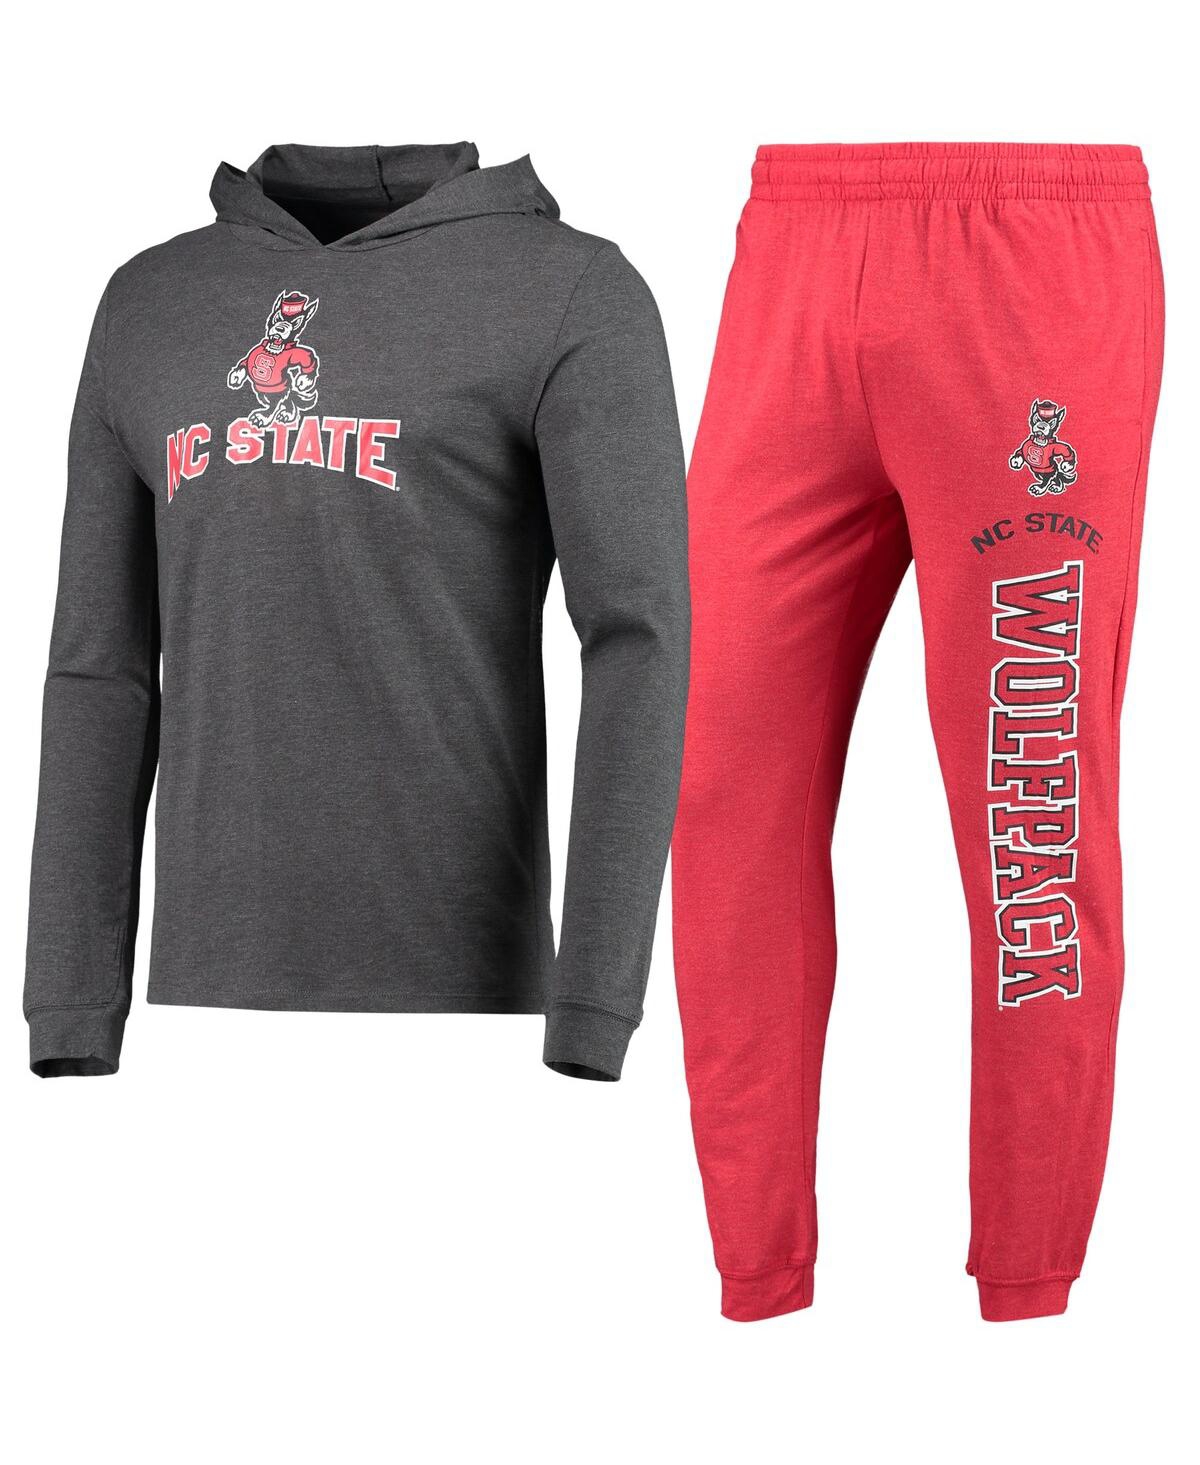 Men's Concepts Sport Red, Heather Charcoal Nc State Wolfpack Meter Long Sleeve Hoodie T-shirt and Jogger Pajama Set - Red, Heather Charcoal